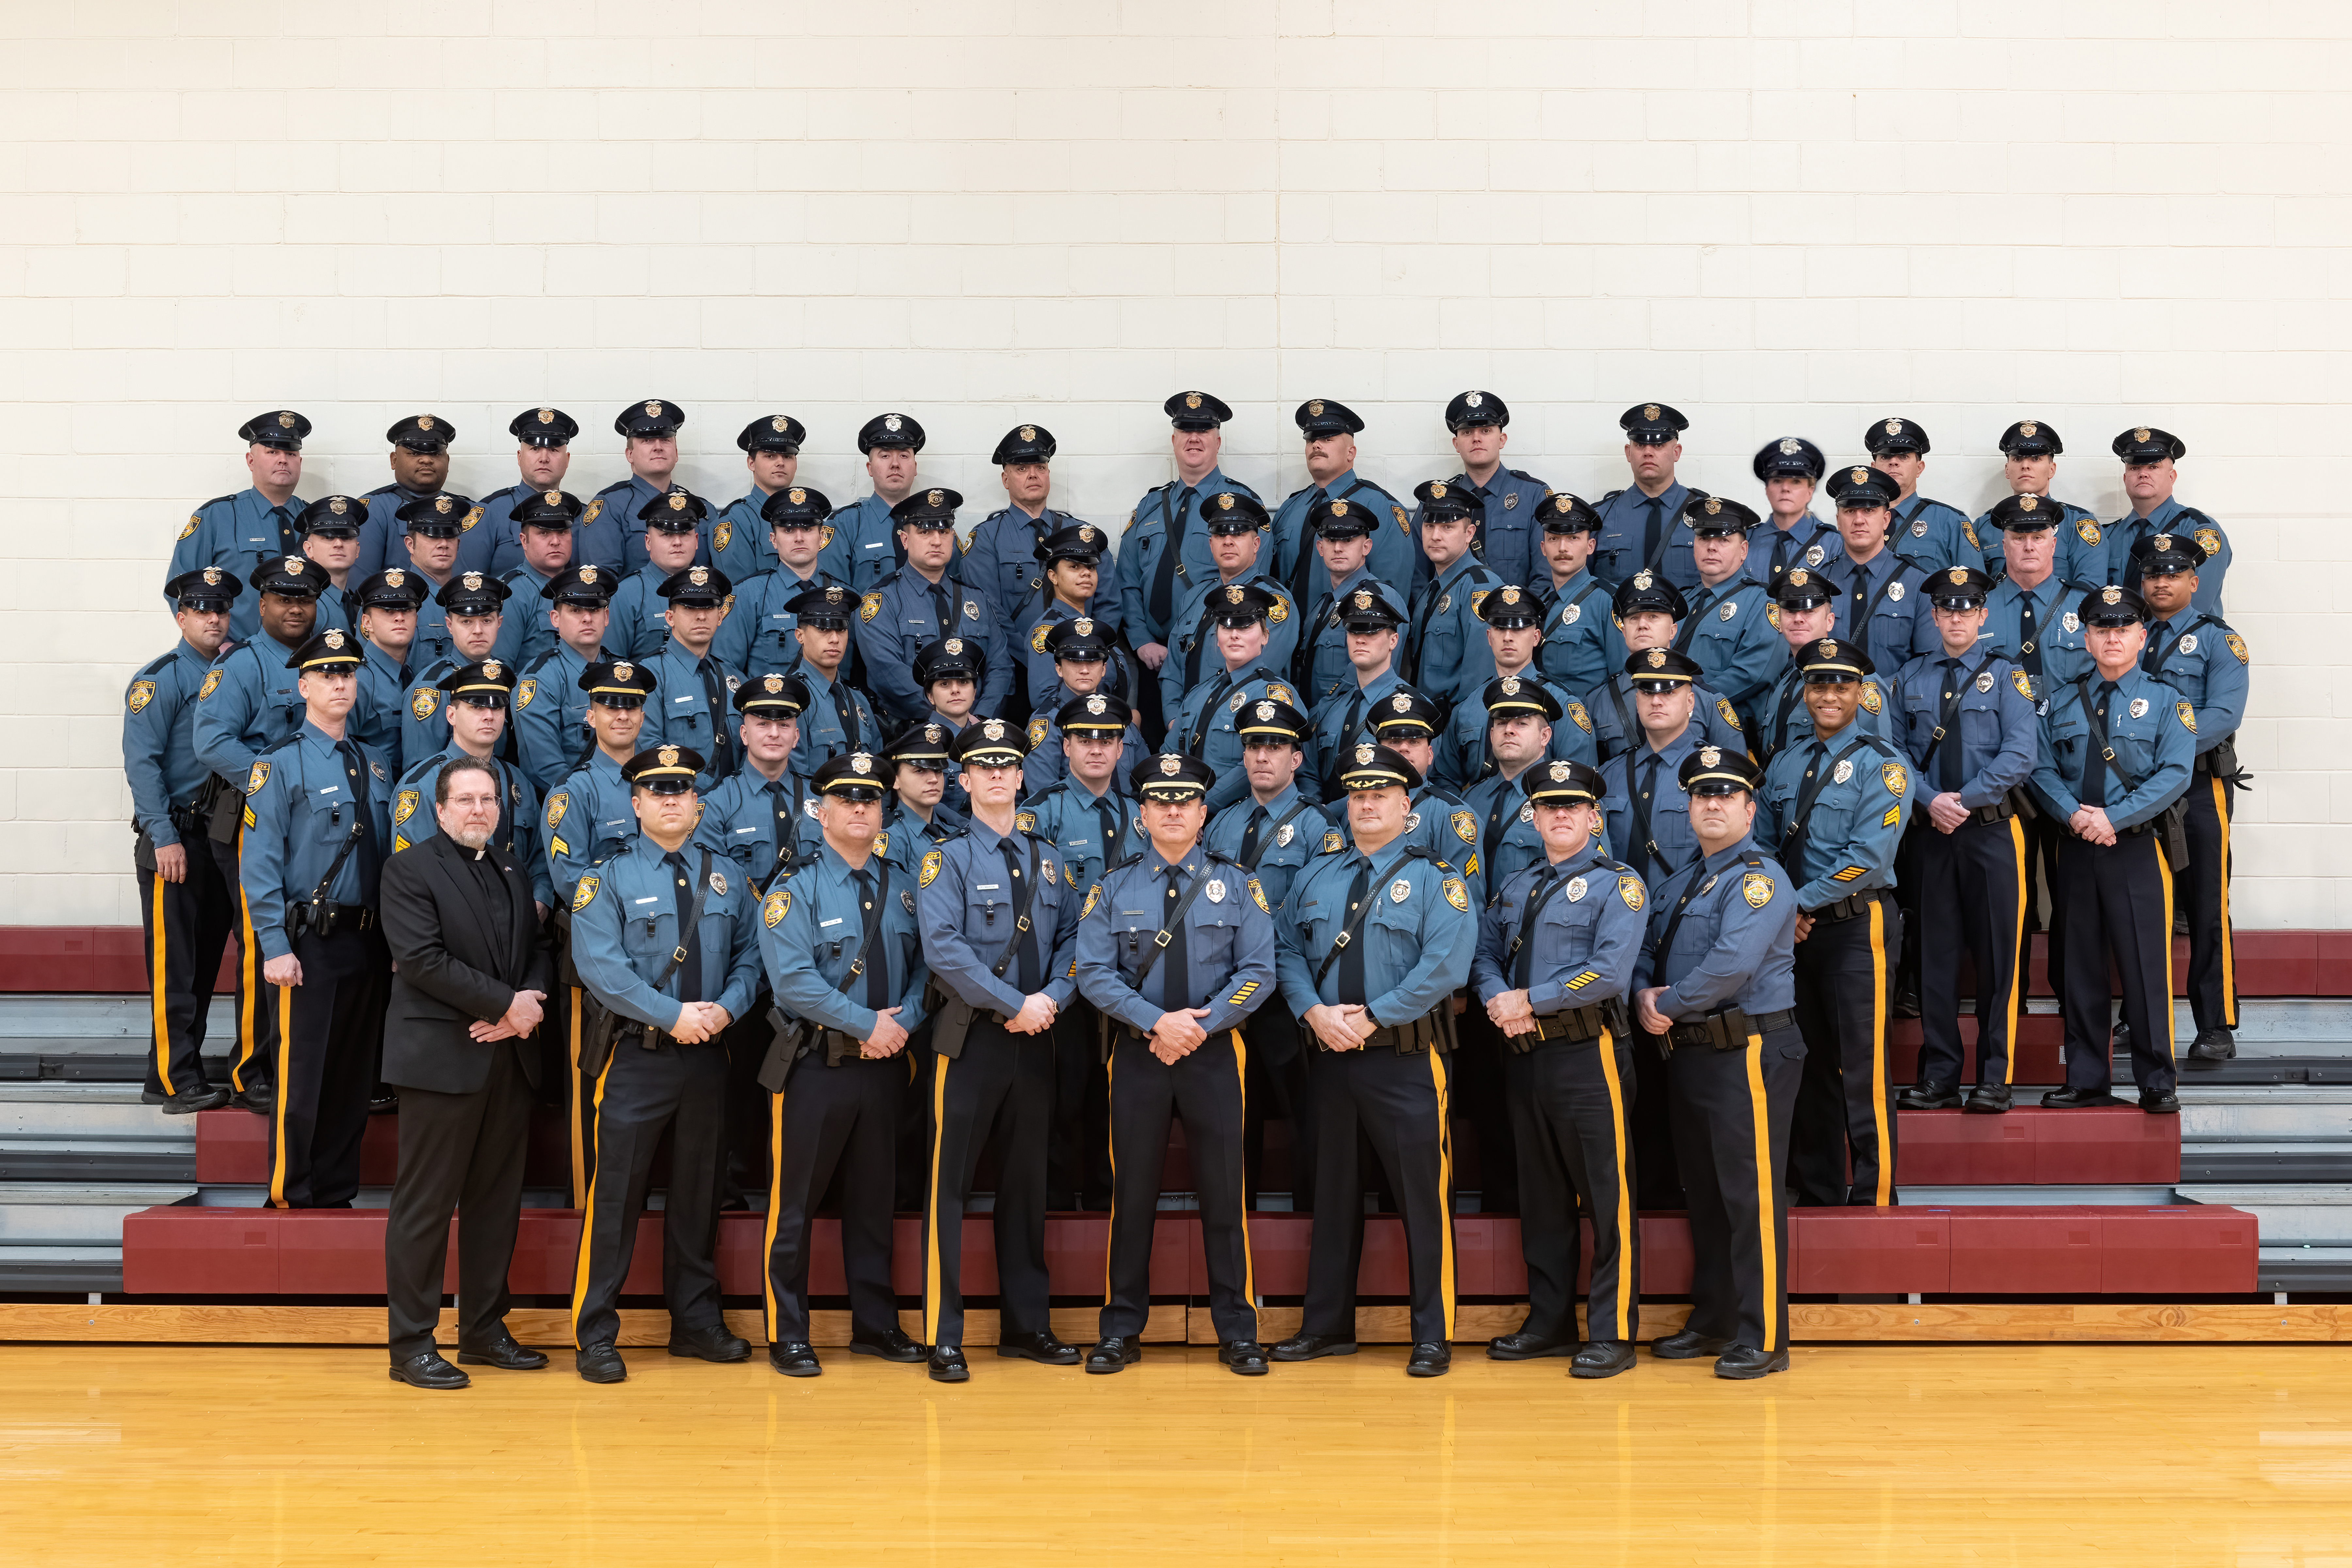 Township of Ocean Police Department (Monmouth County), NJ Police Jobs